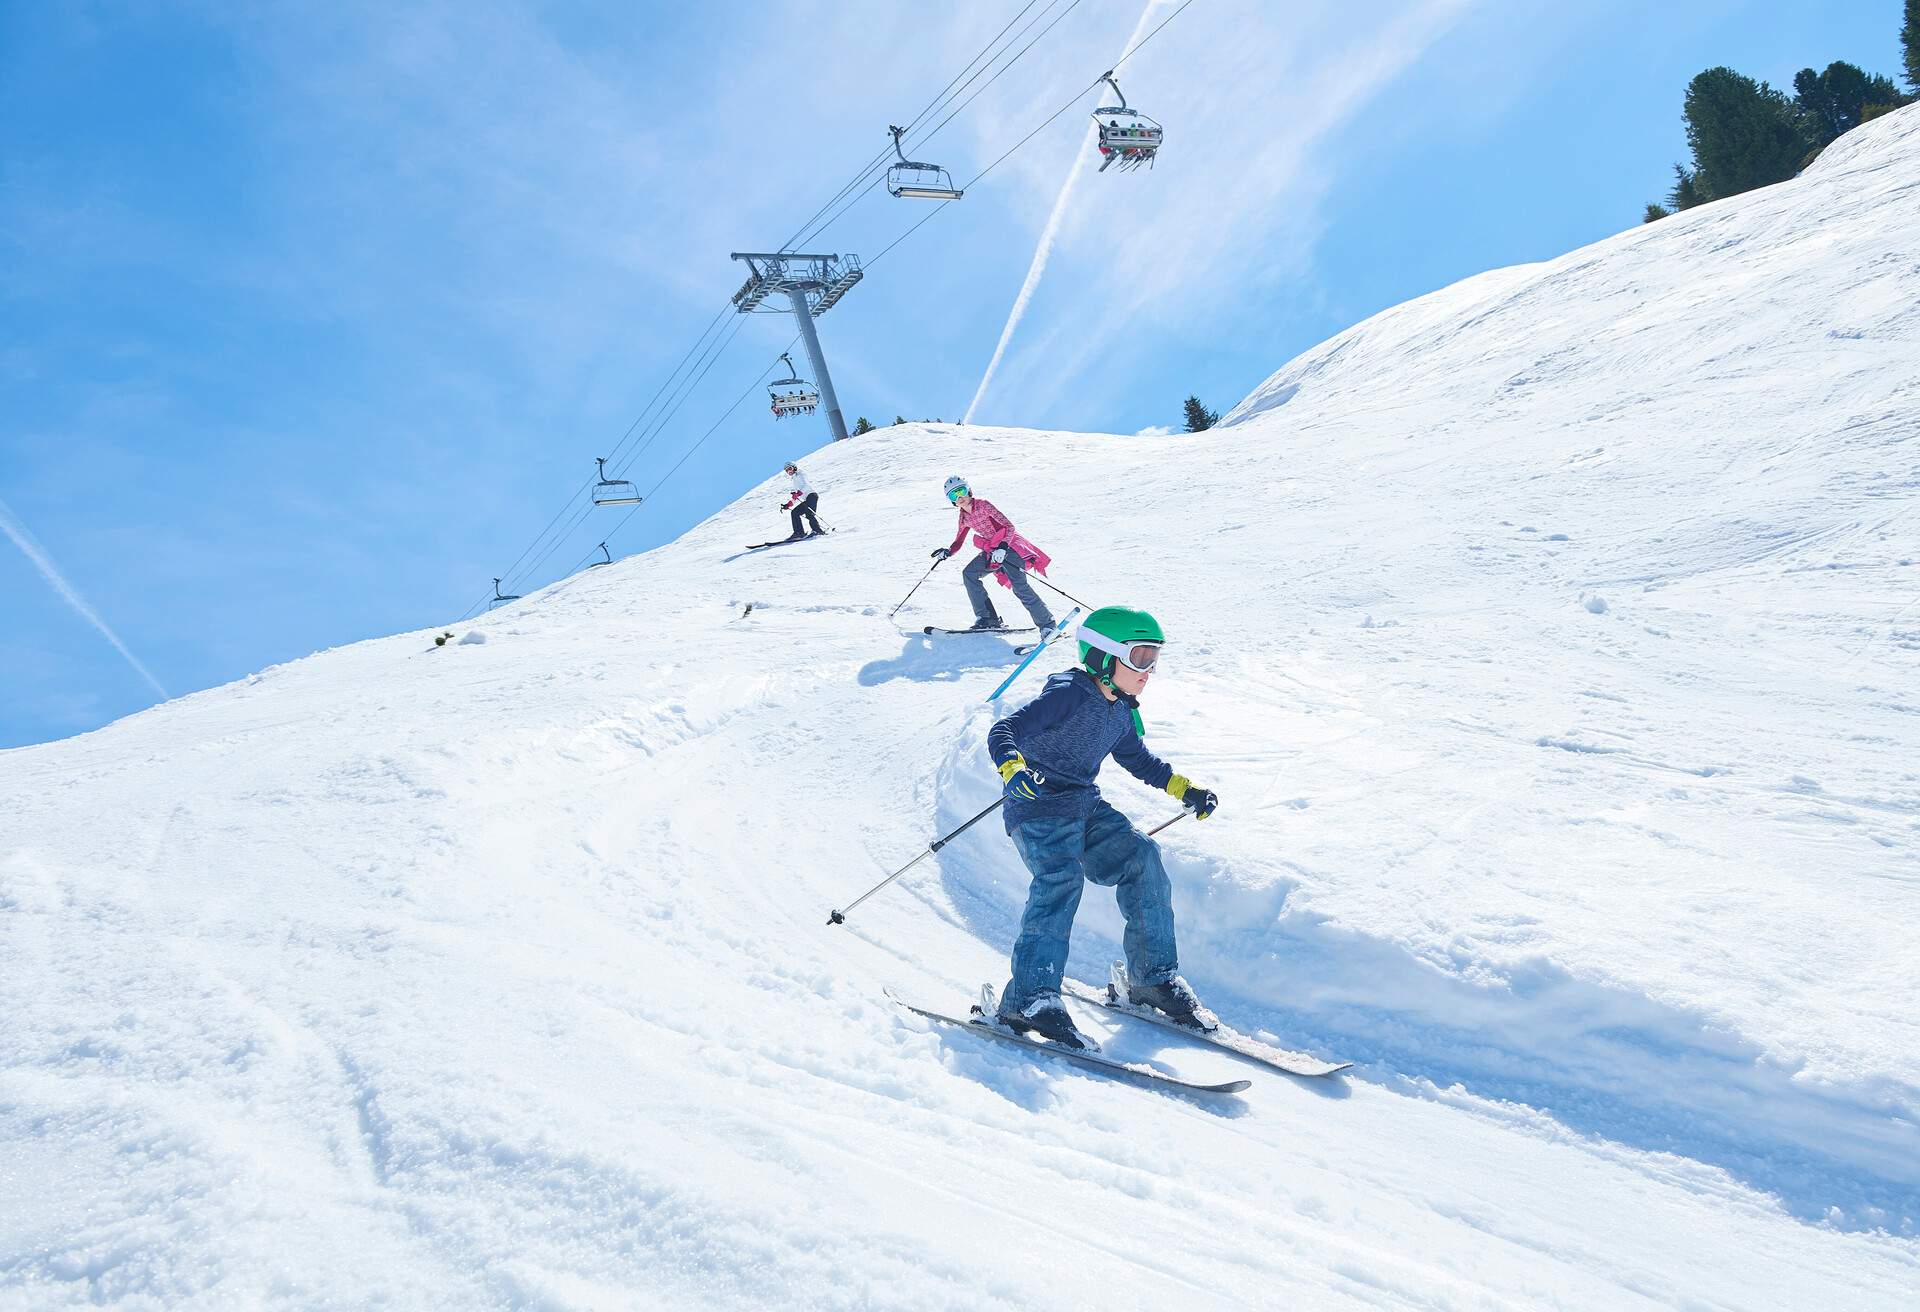 Young kids skiing down a slope with chairlifts passing overhead.